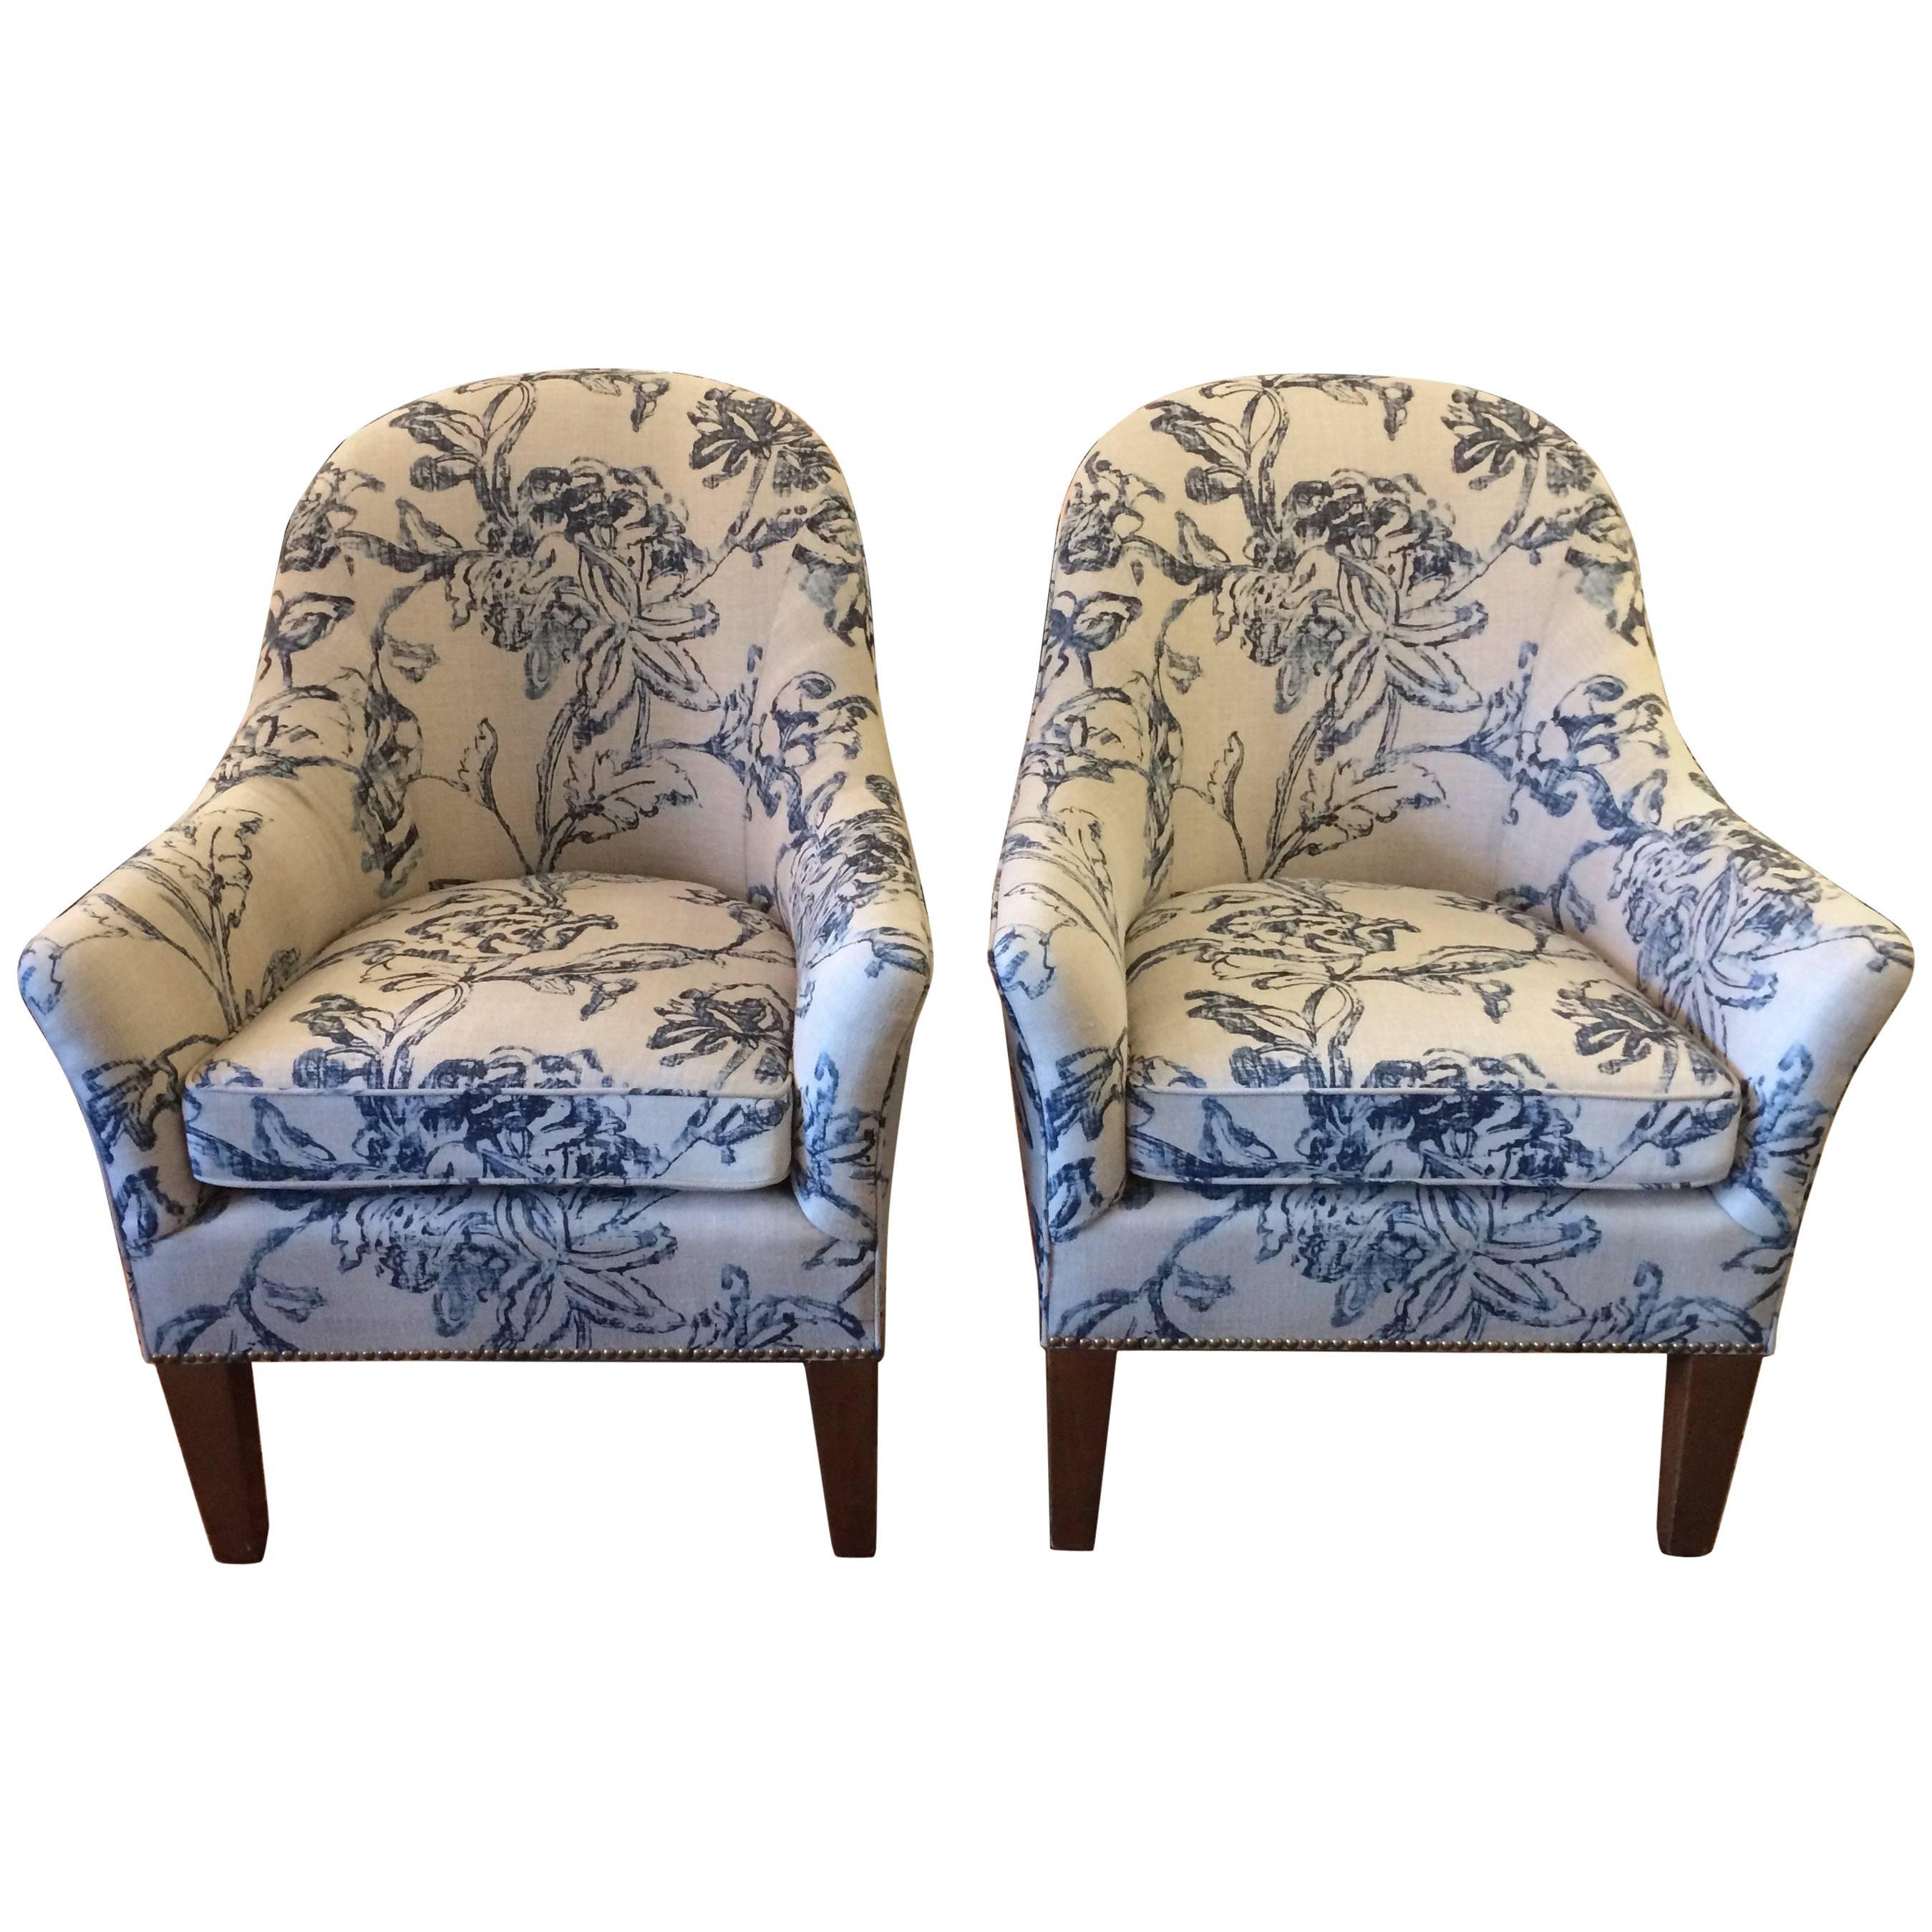 Classic Pair of Club Chairs in Blue and White Linen